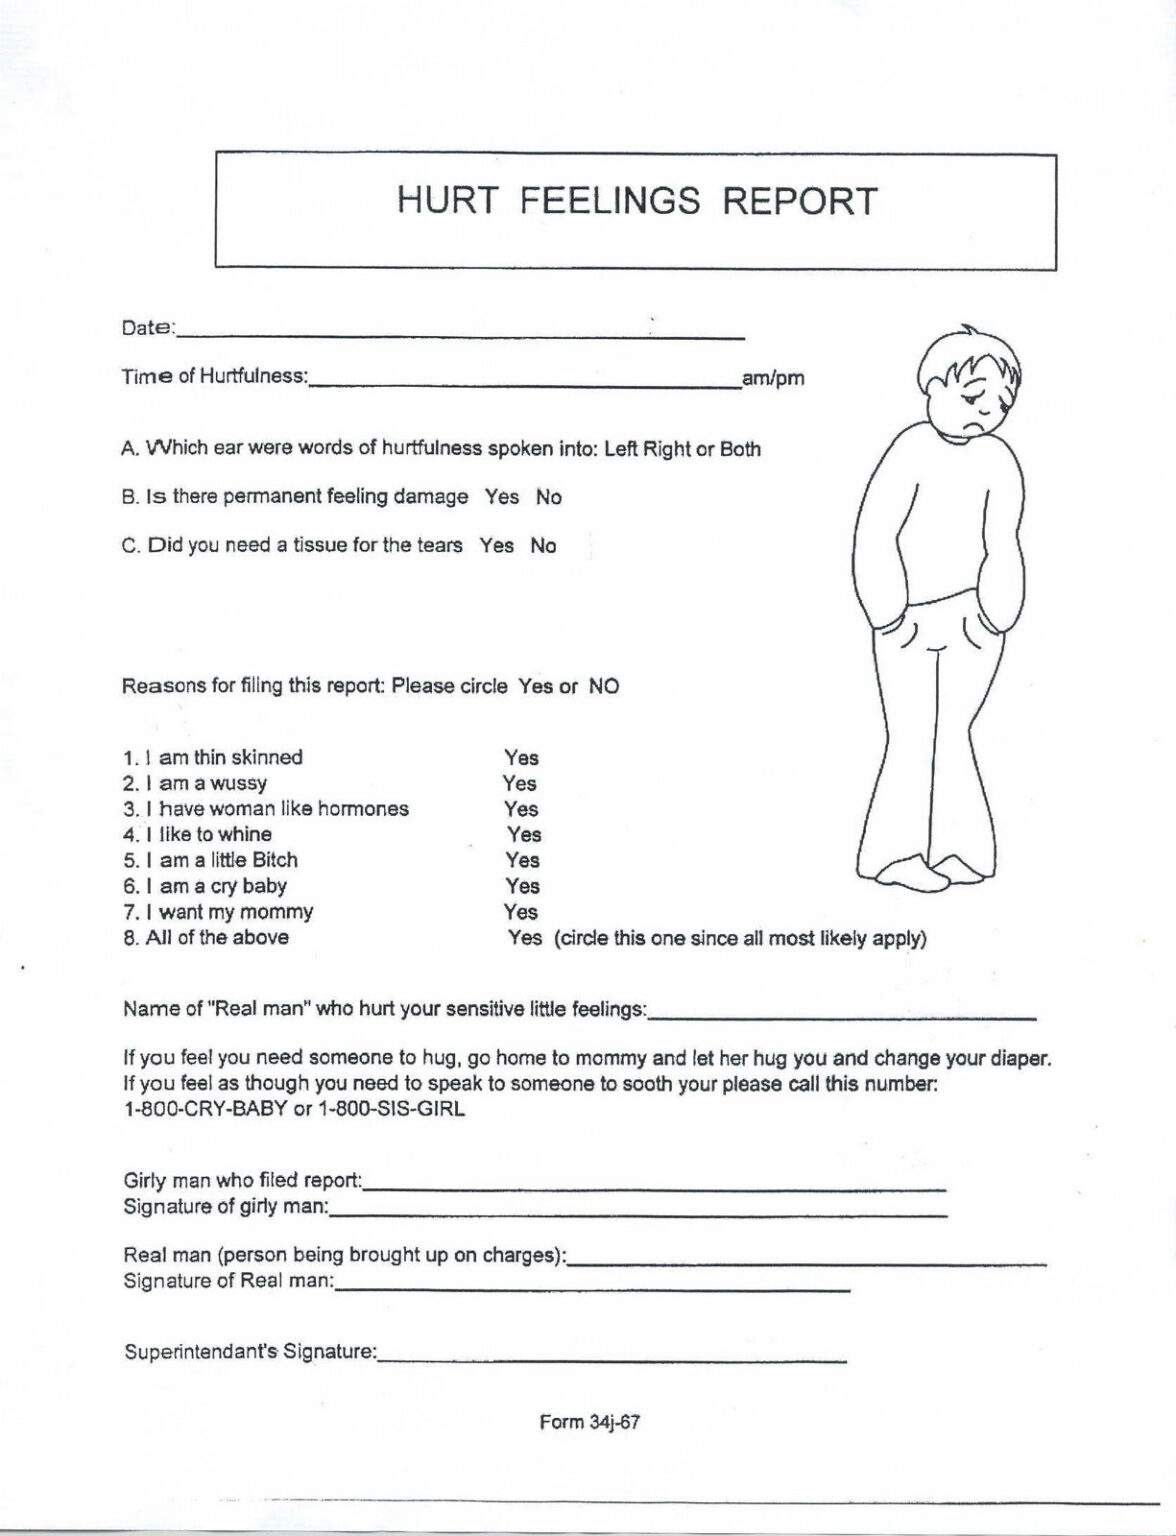 hurt-form-within-hurt-feelings-report-template-best-template-ideas